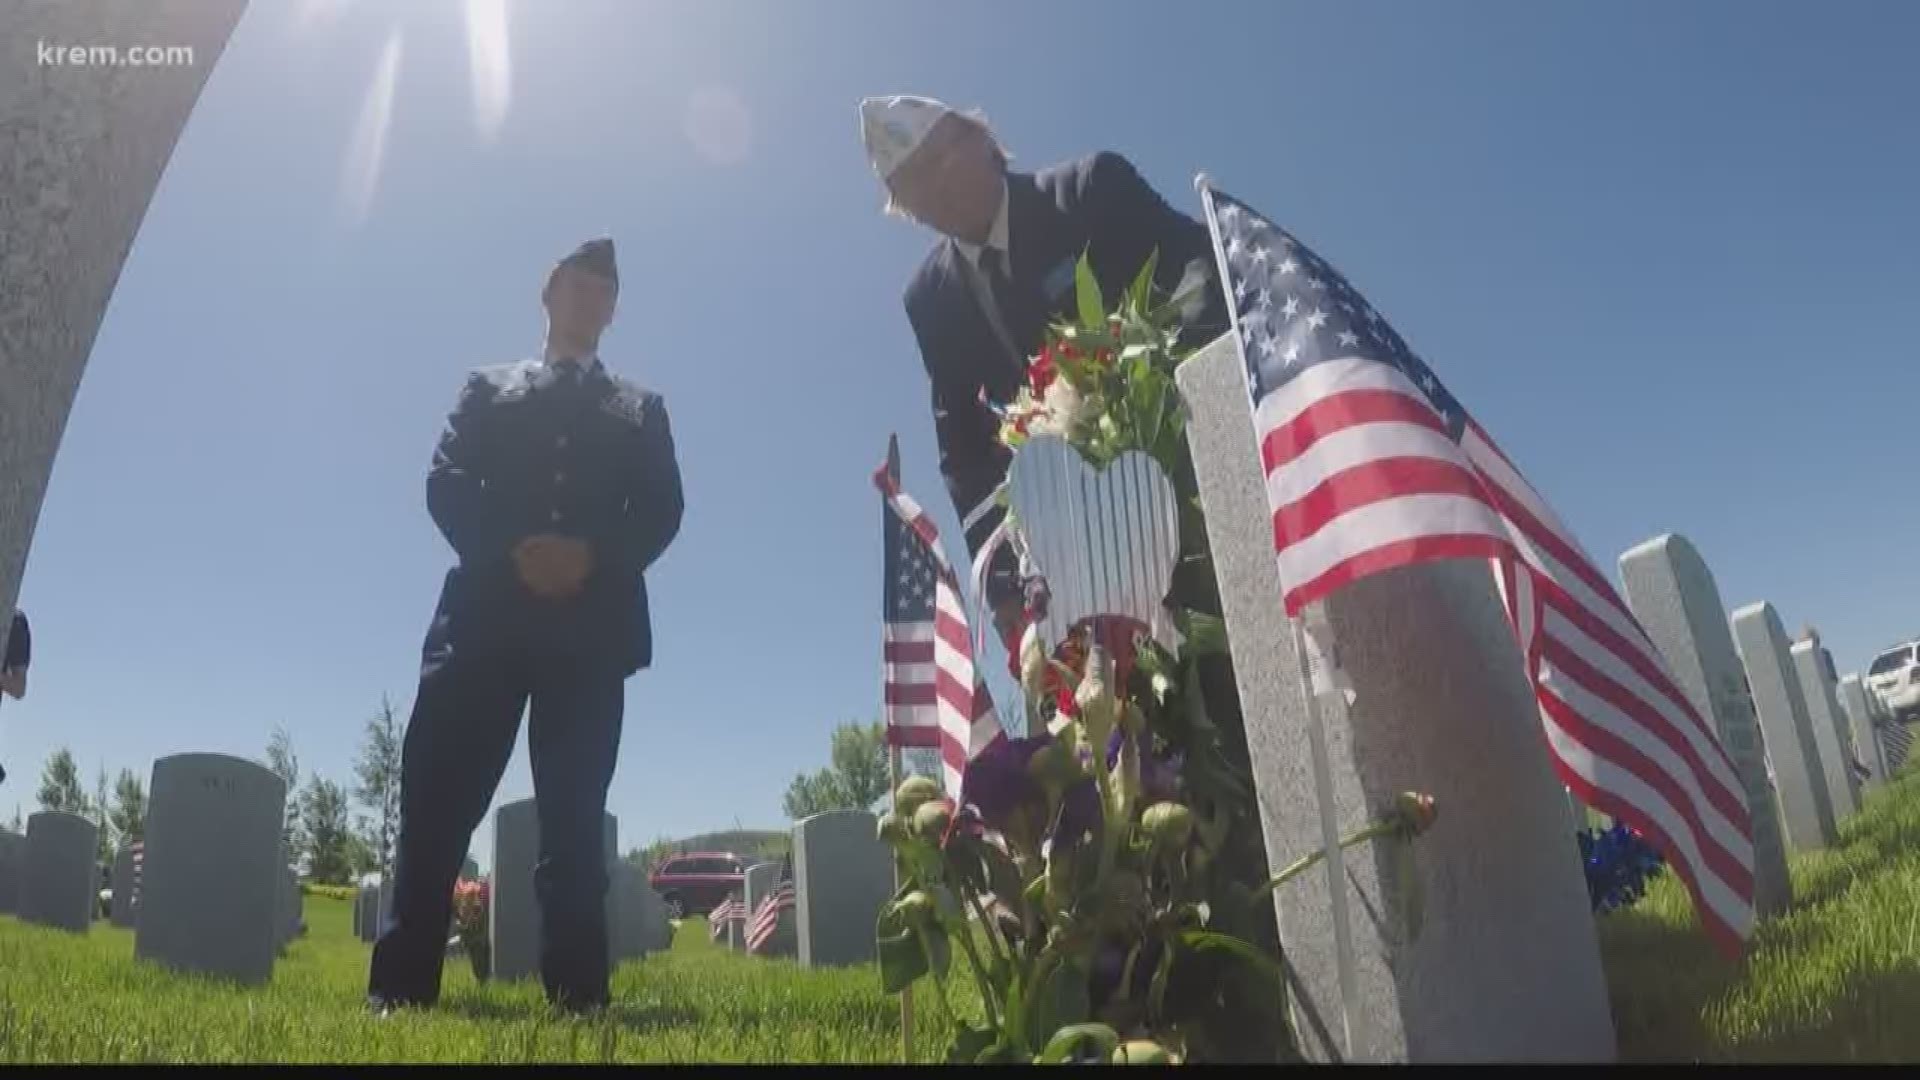 People gathered at the State Veterans Cemetery to honor the legacy of our heroes who fought for the privileges we enjoy today.